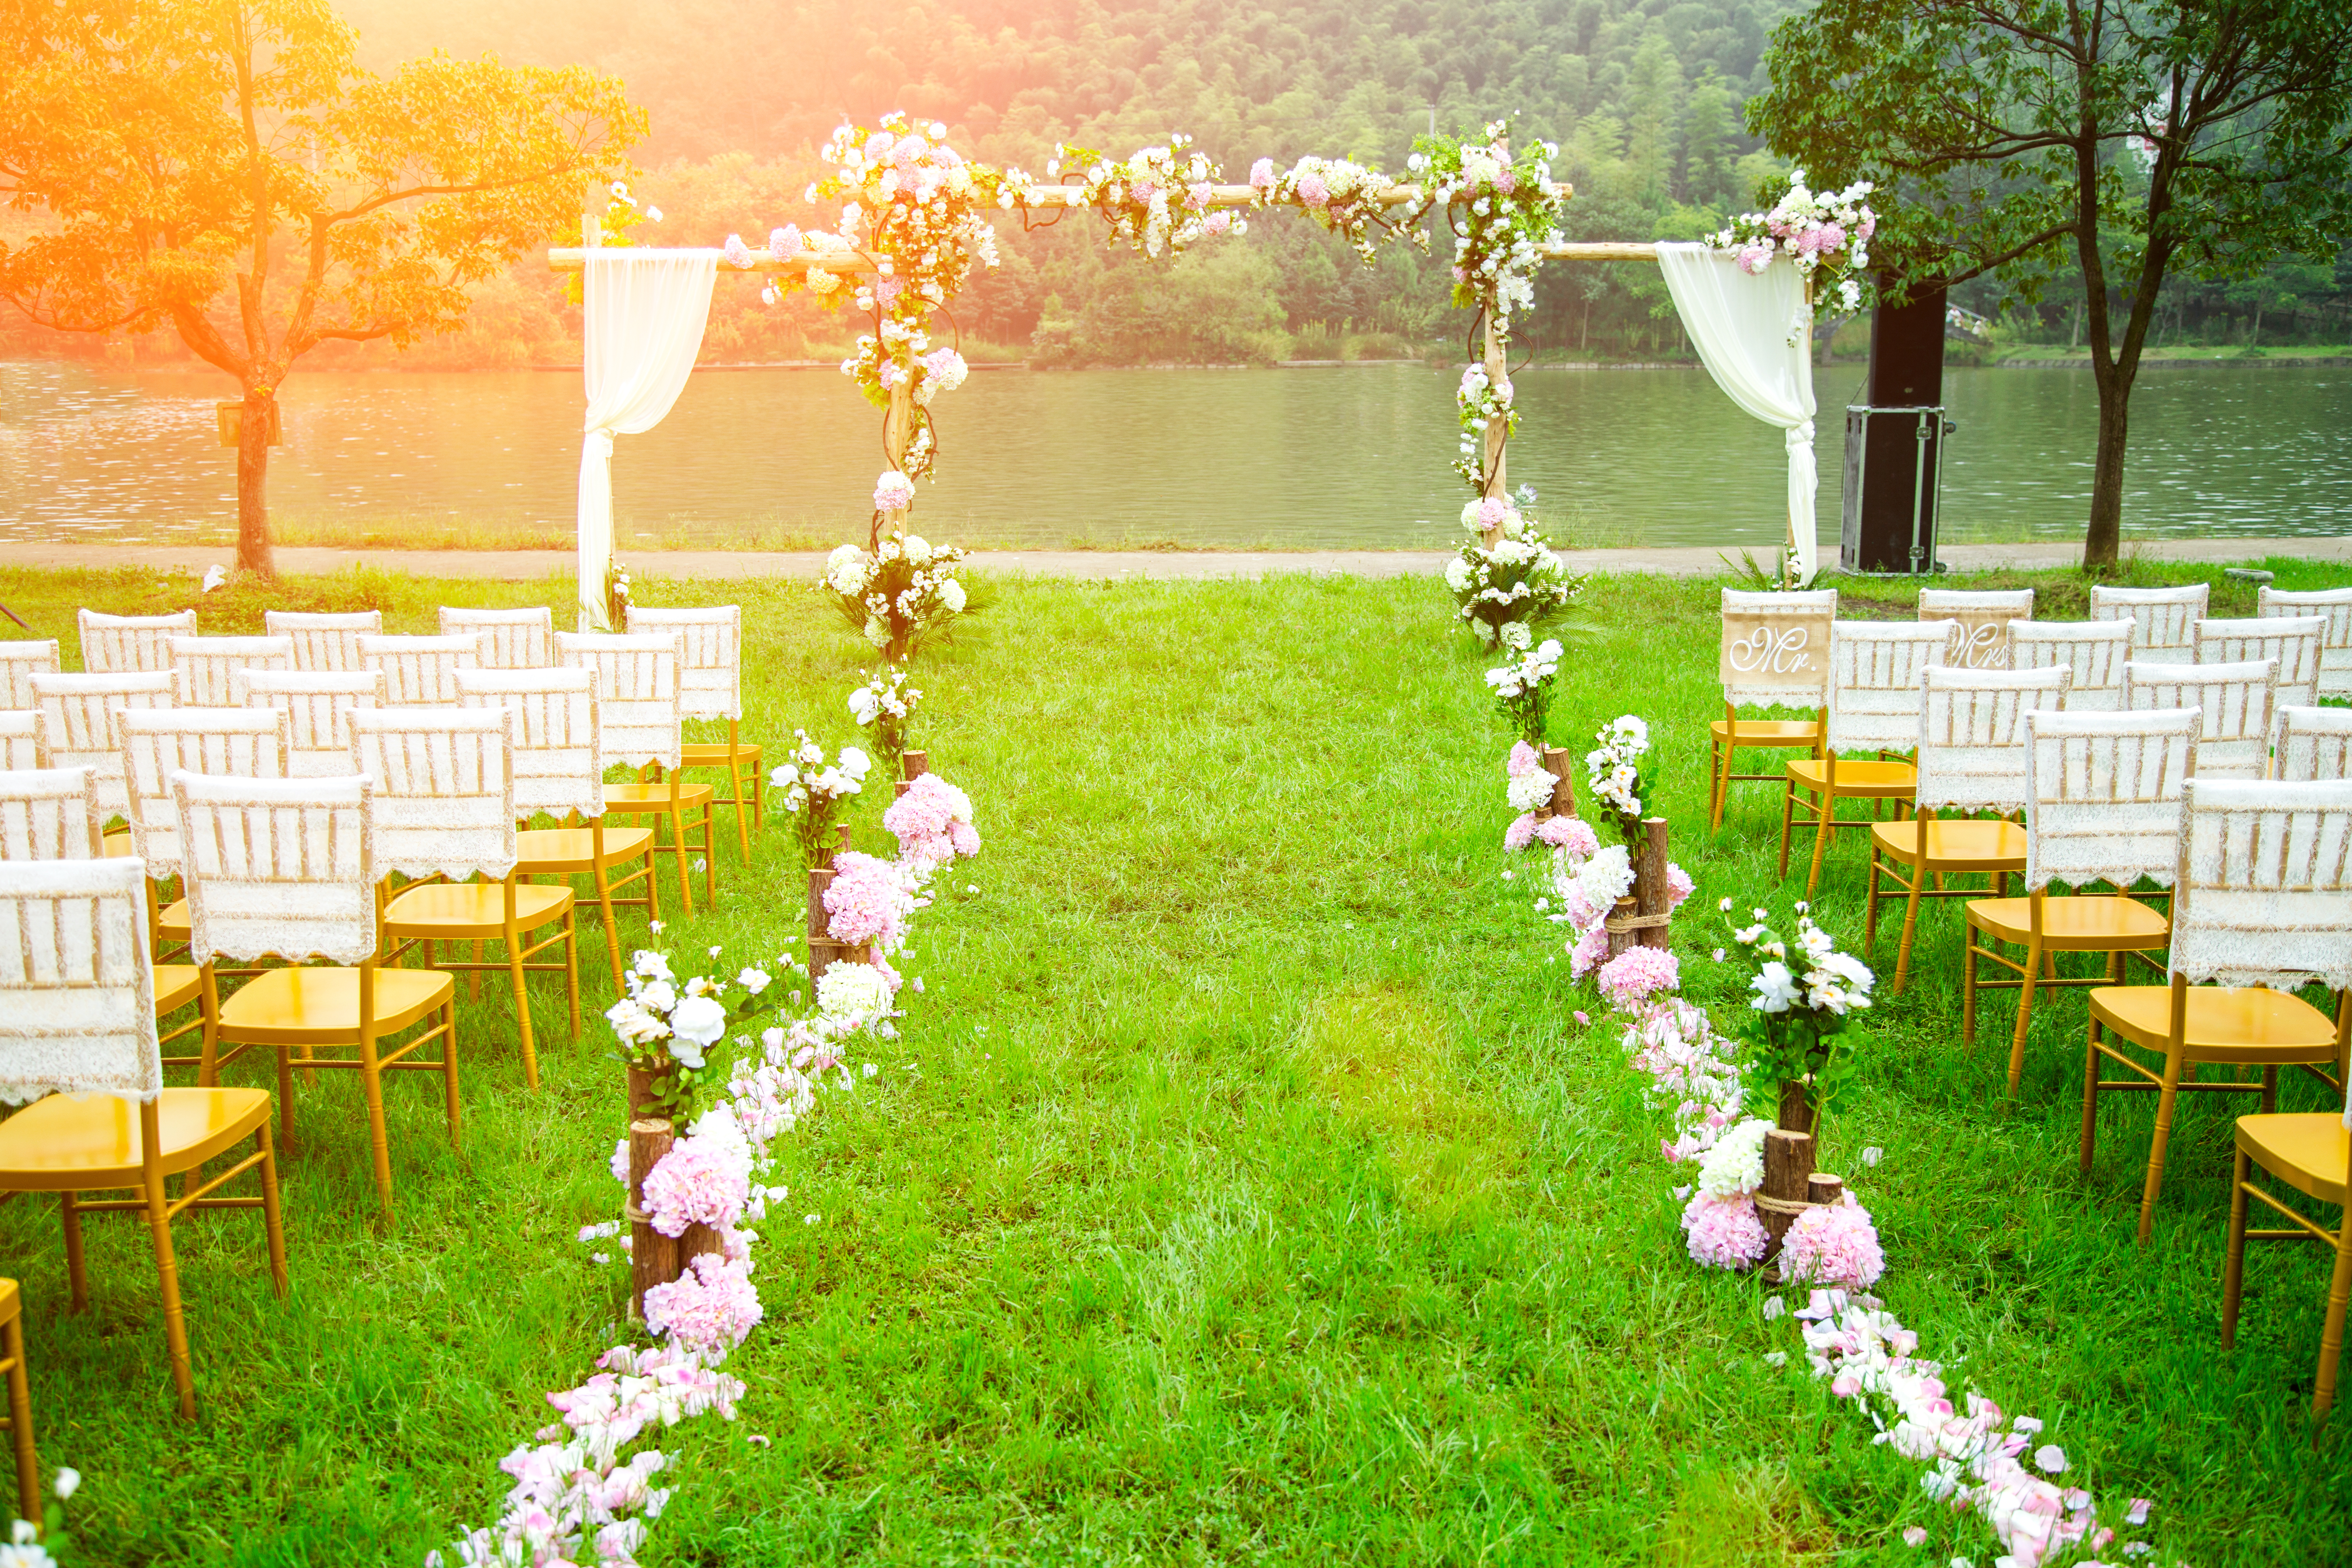 A wedding venue | Source: Getty Images